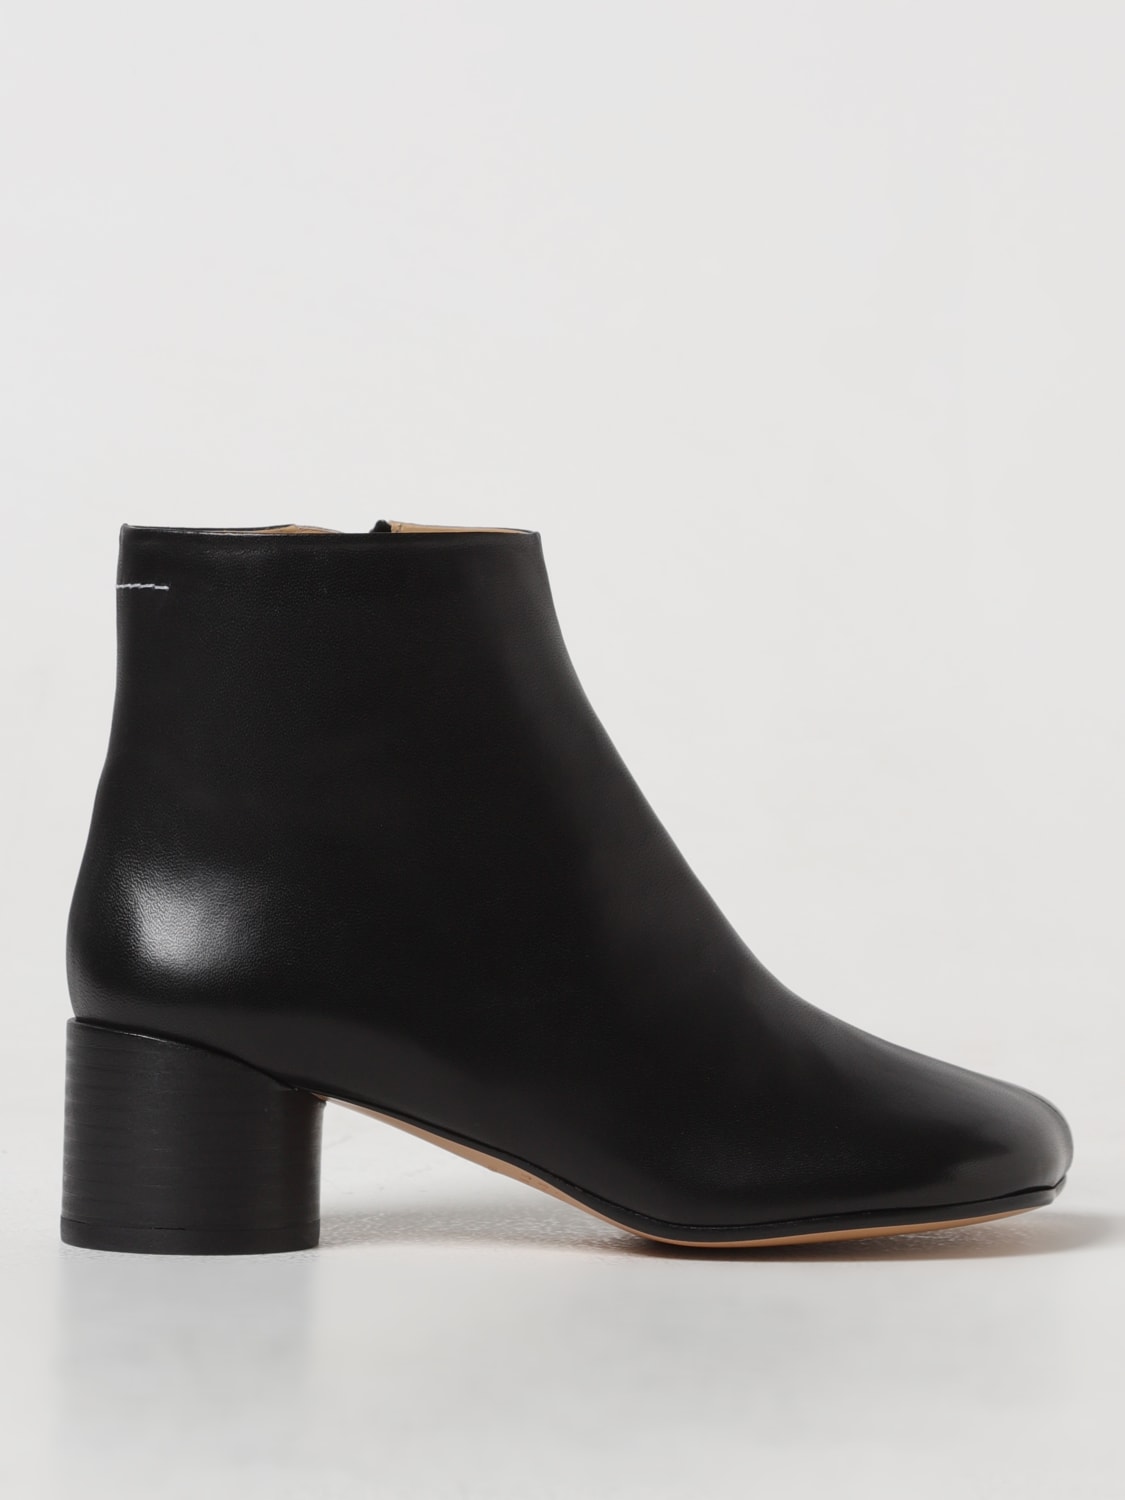 MM6 MAISON MARGIELA: Boots woman - Black | Mm6 Maison Margiela flat ankle  boots S59WU0234P3628 online at GIGLIO.COM